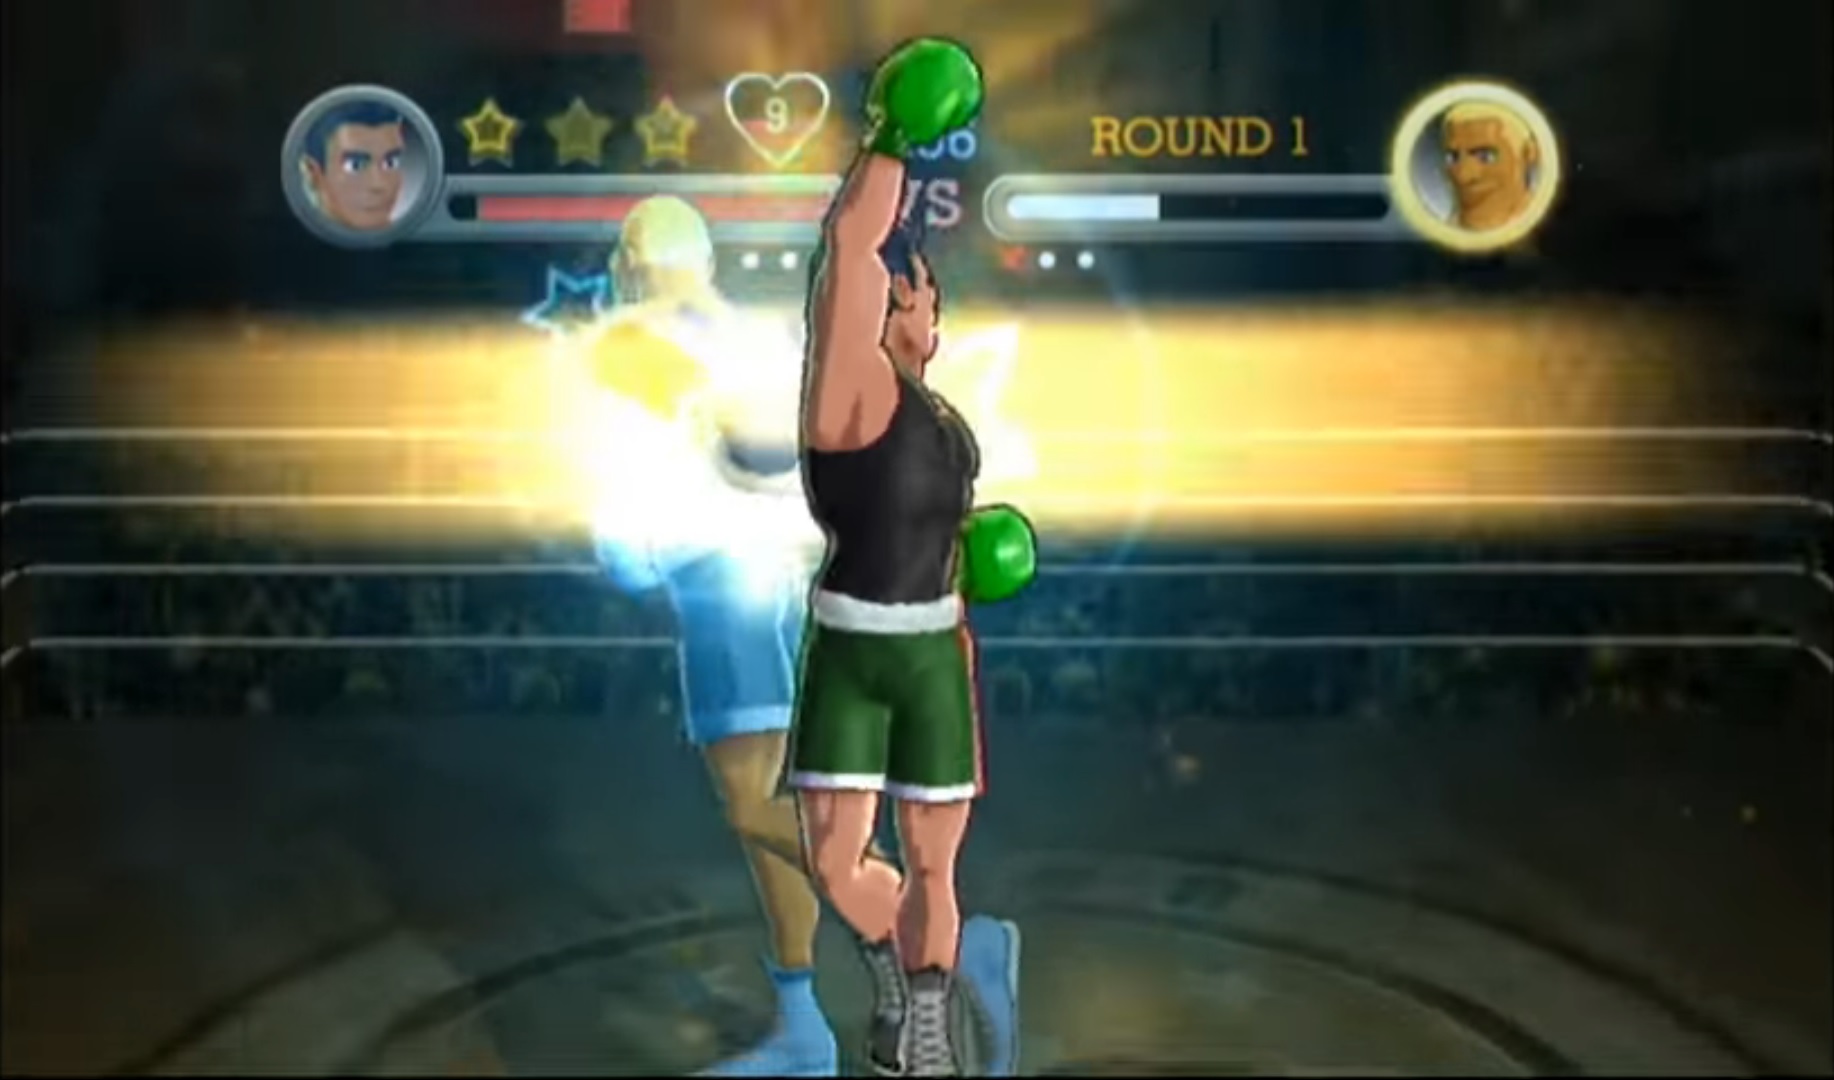 Planned All Along: Punch-Out!! Wii